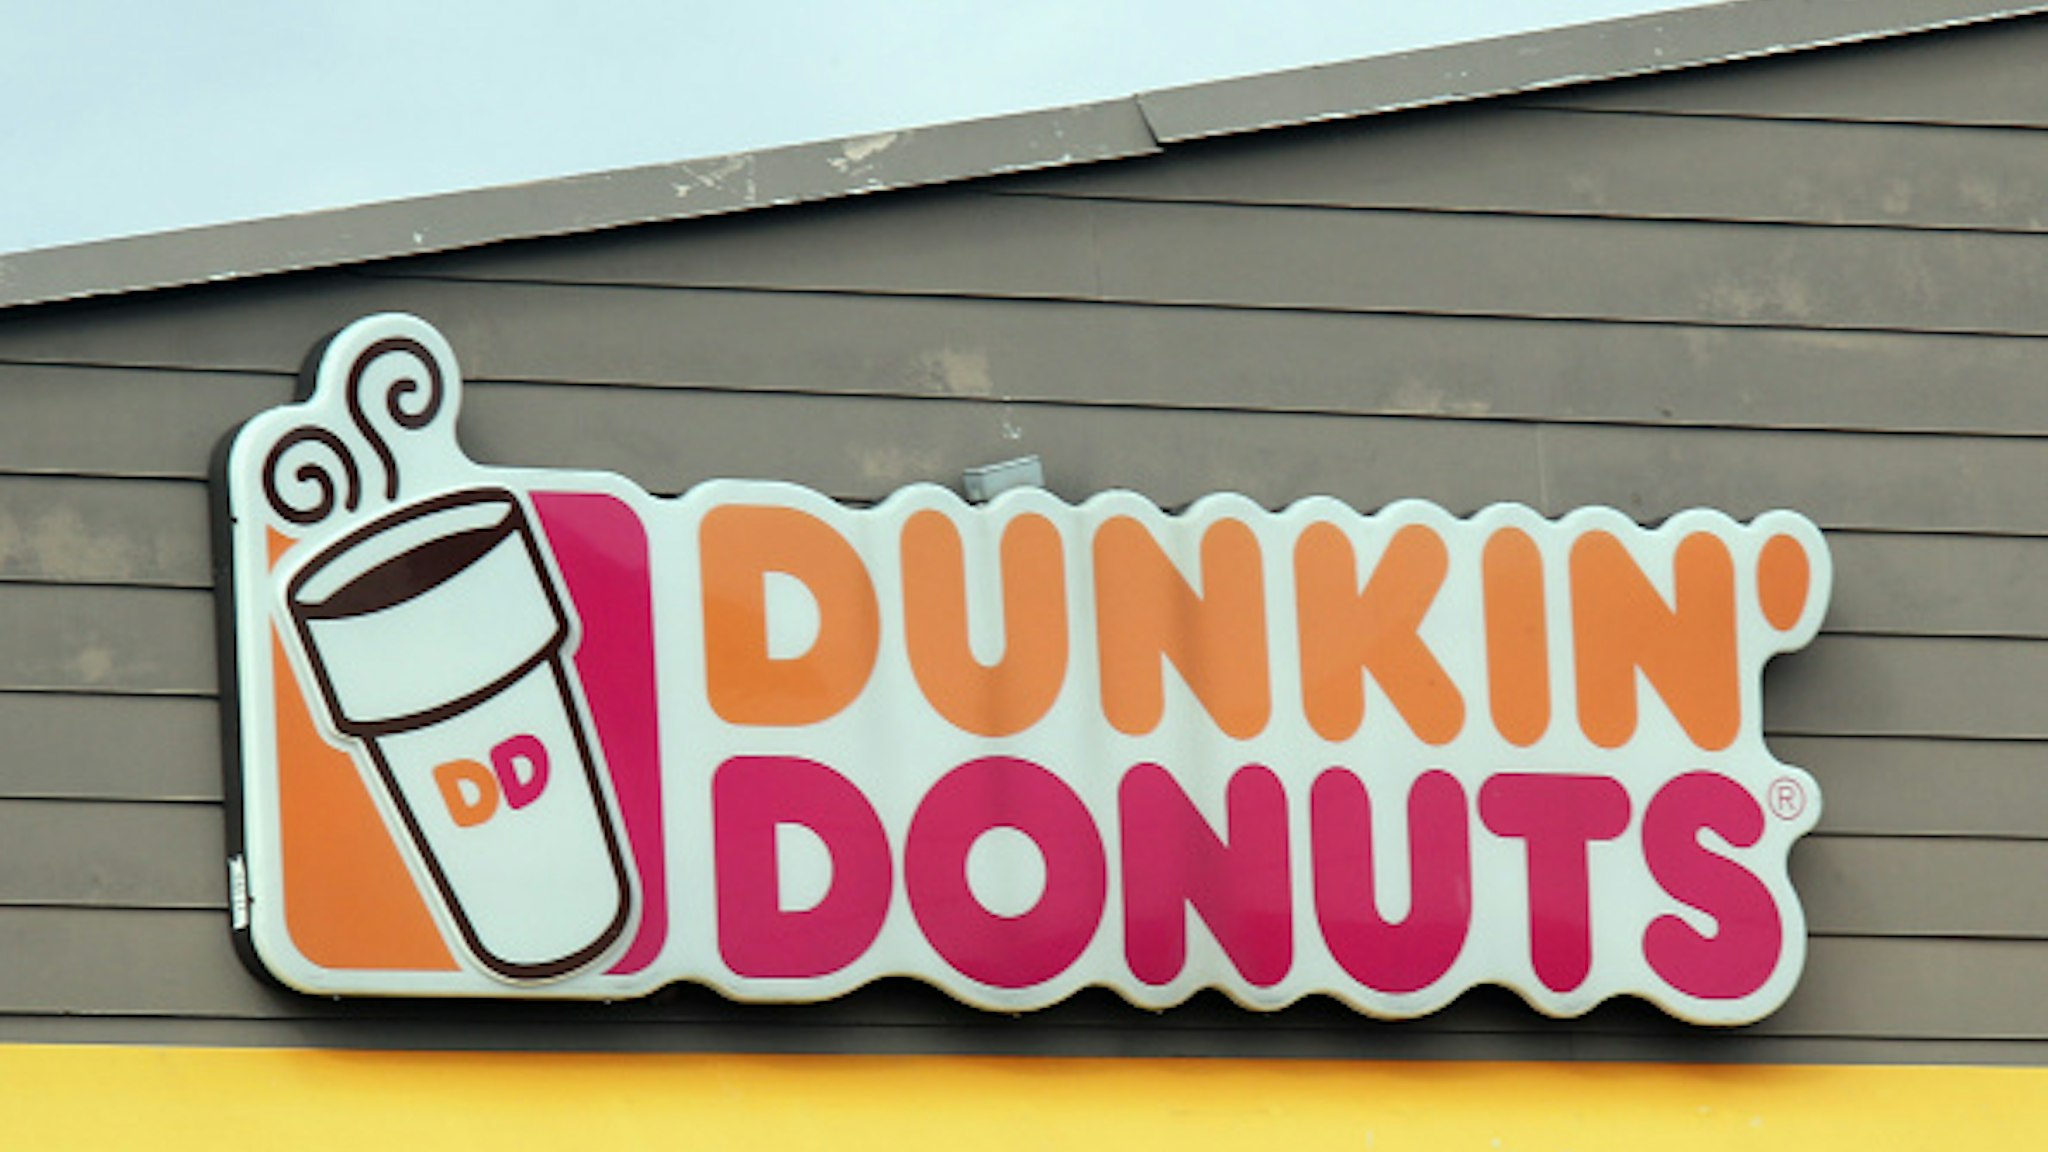 LEVITTOWN, NEW YORK - MARCH 16: An image of the sign for Dunkin' Donuts as photographed on March 16, 2020 in Levittown, New York.